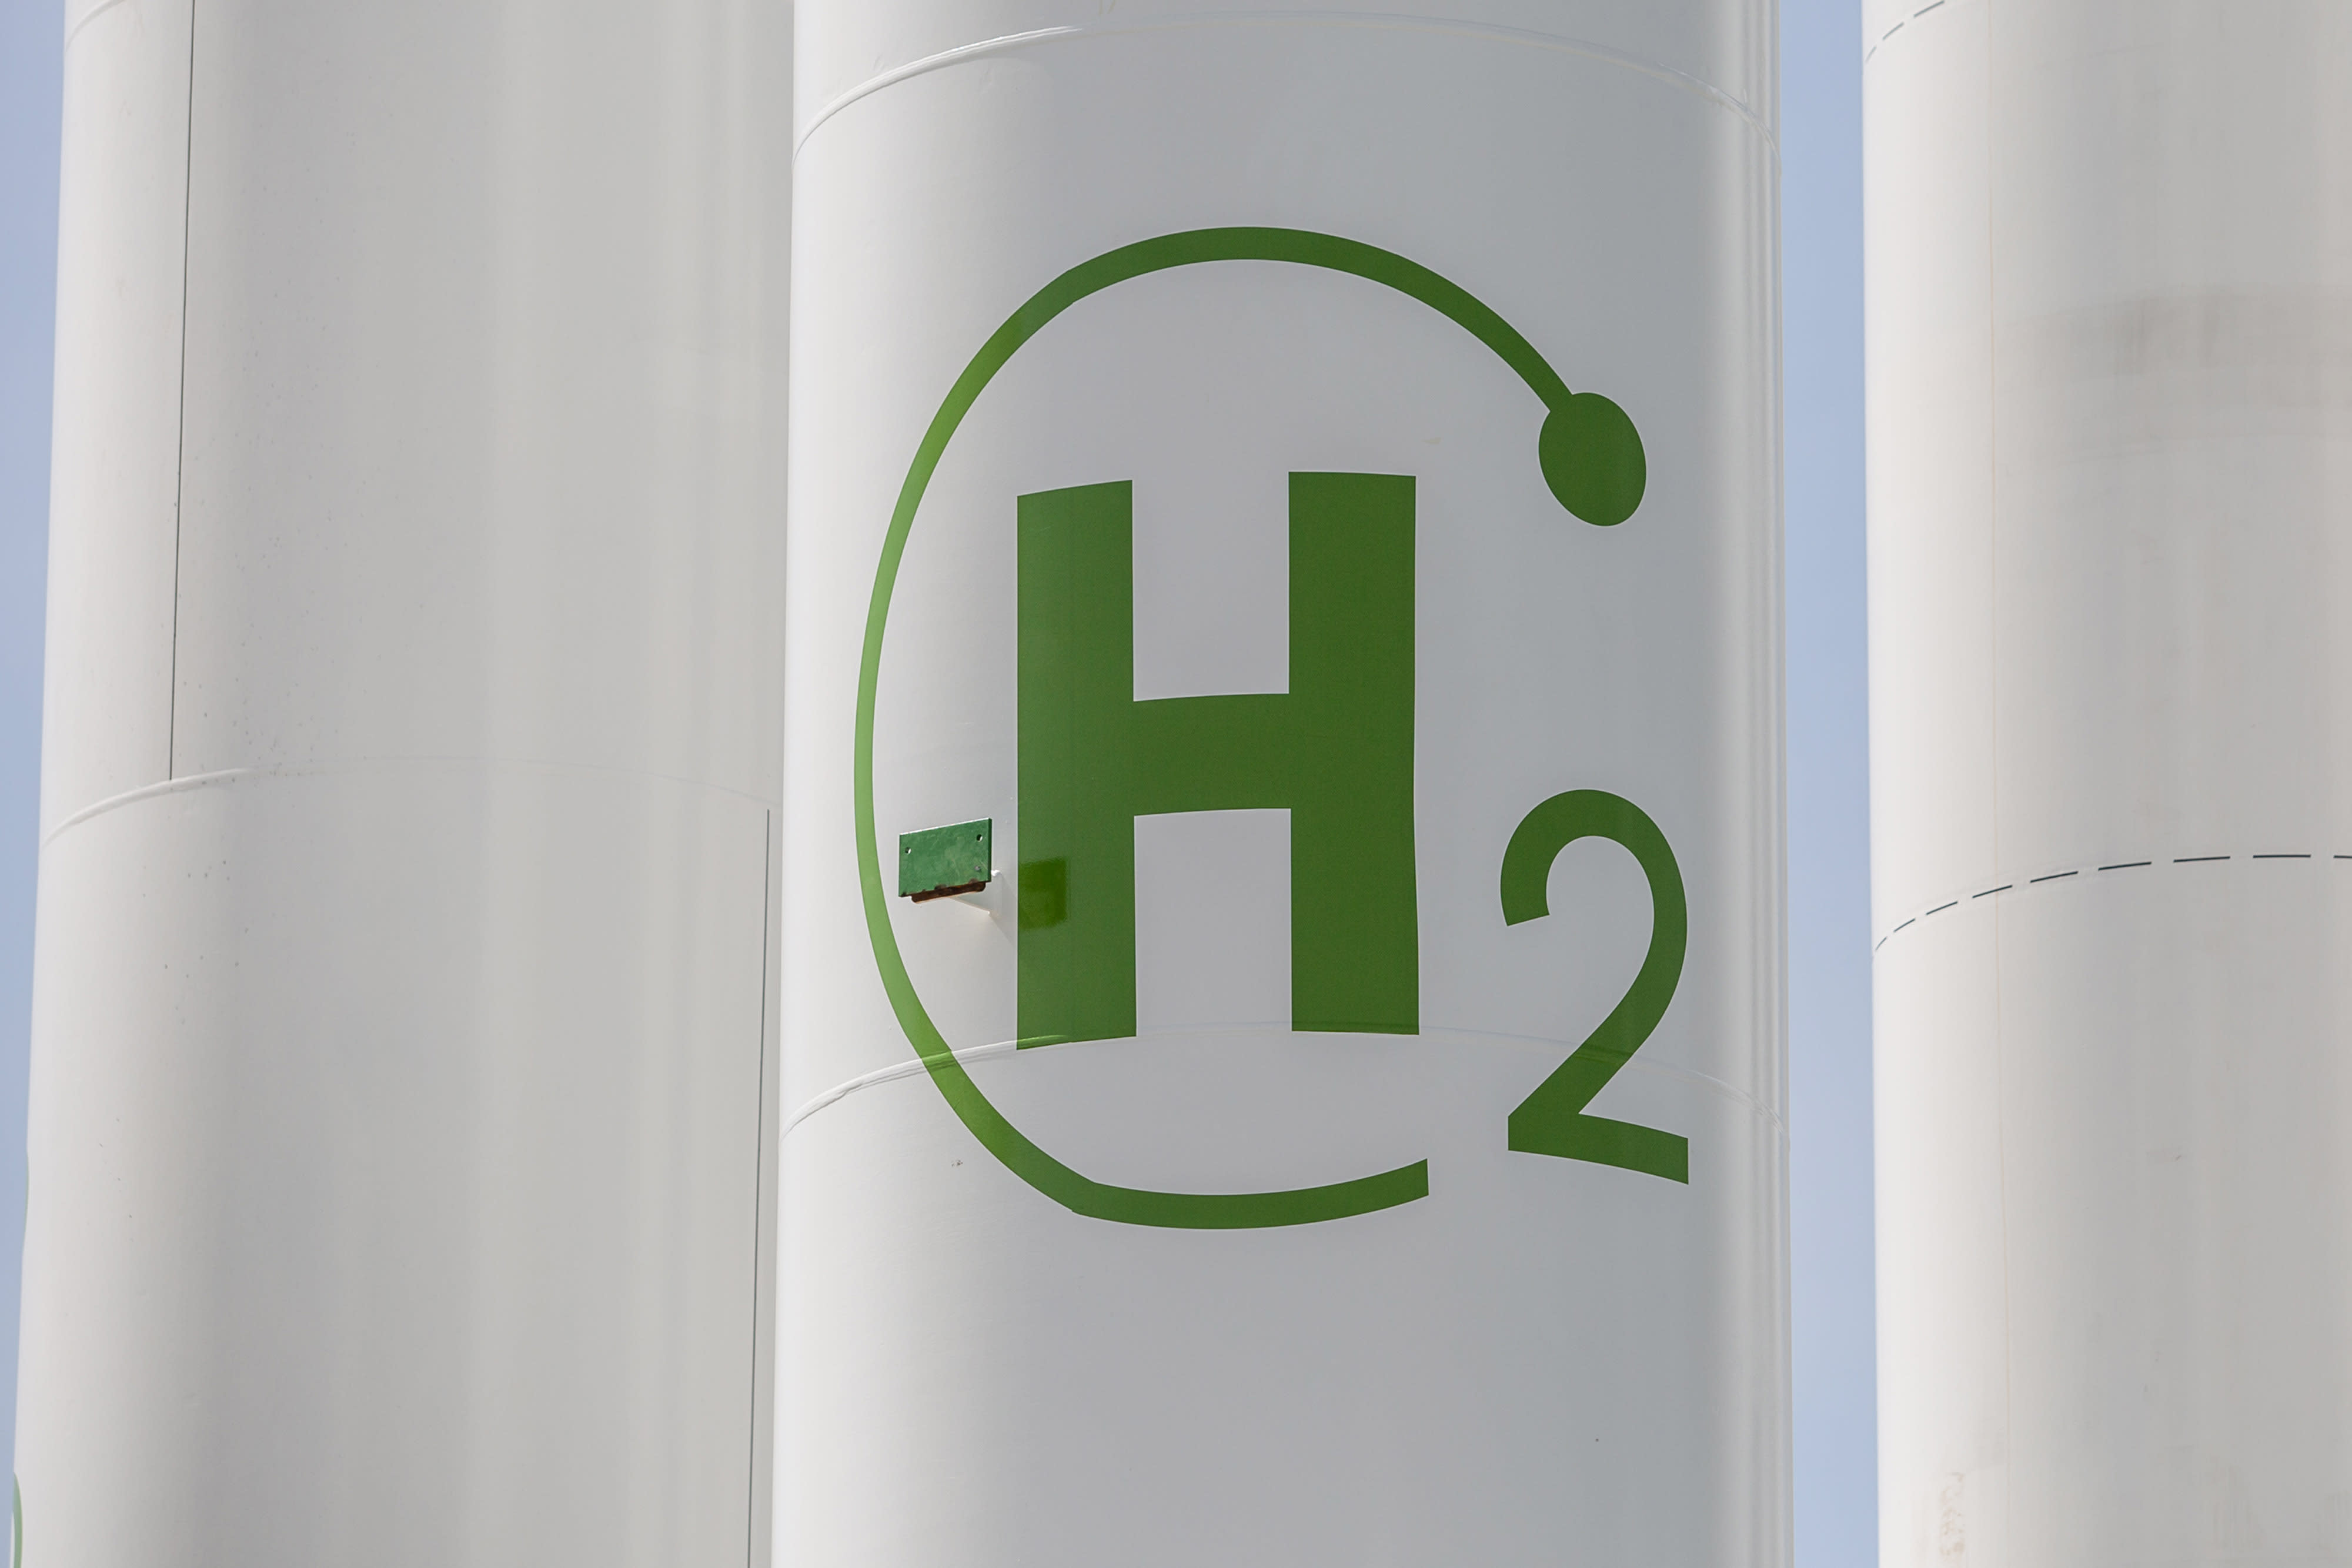 Want to cash in on 'clean' hydrogen? HSBC shares its stock picks — giving one over 110% upside